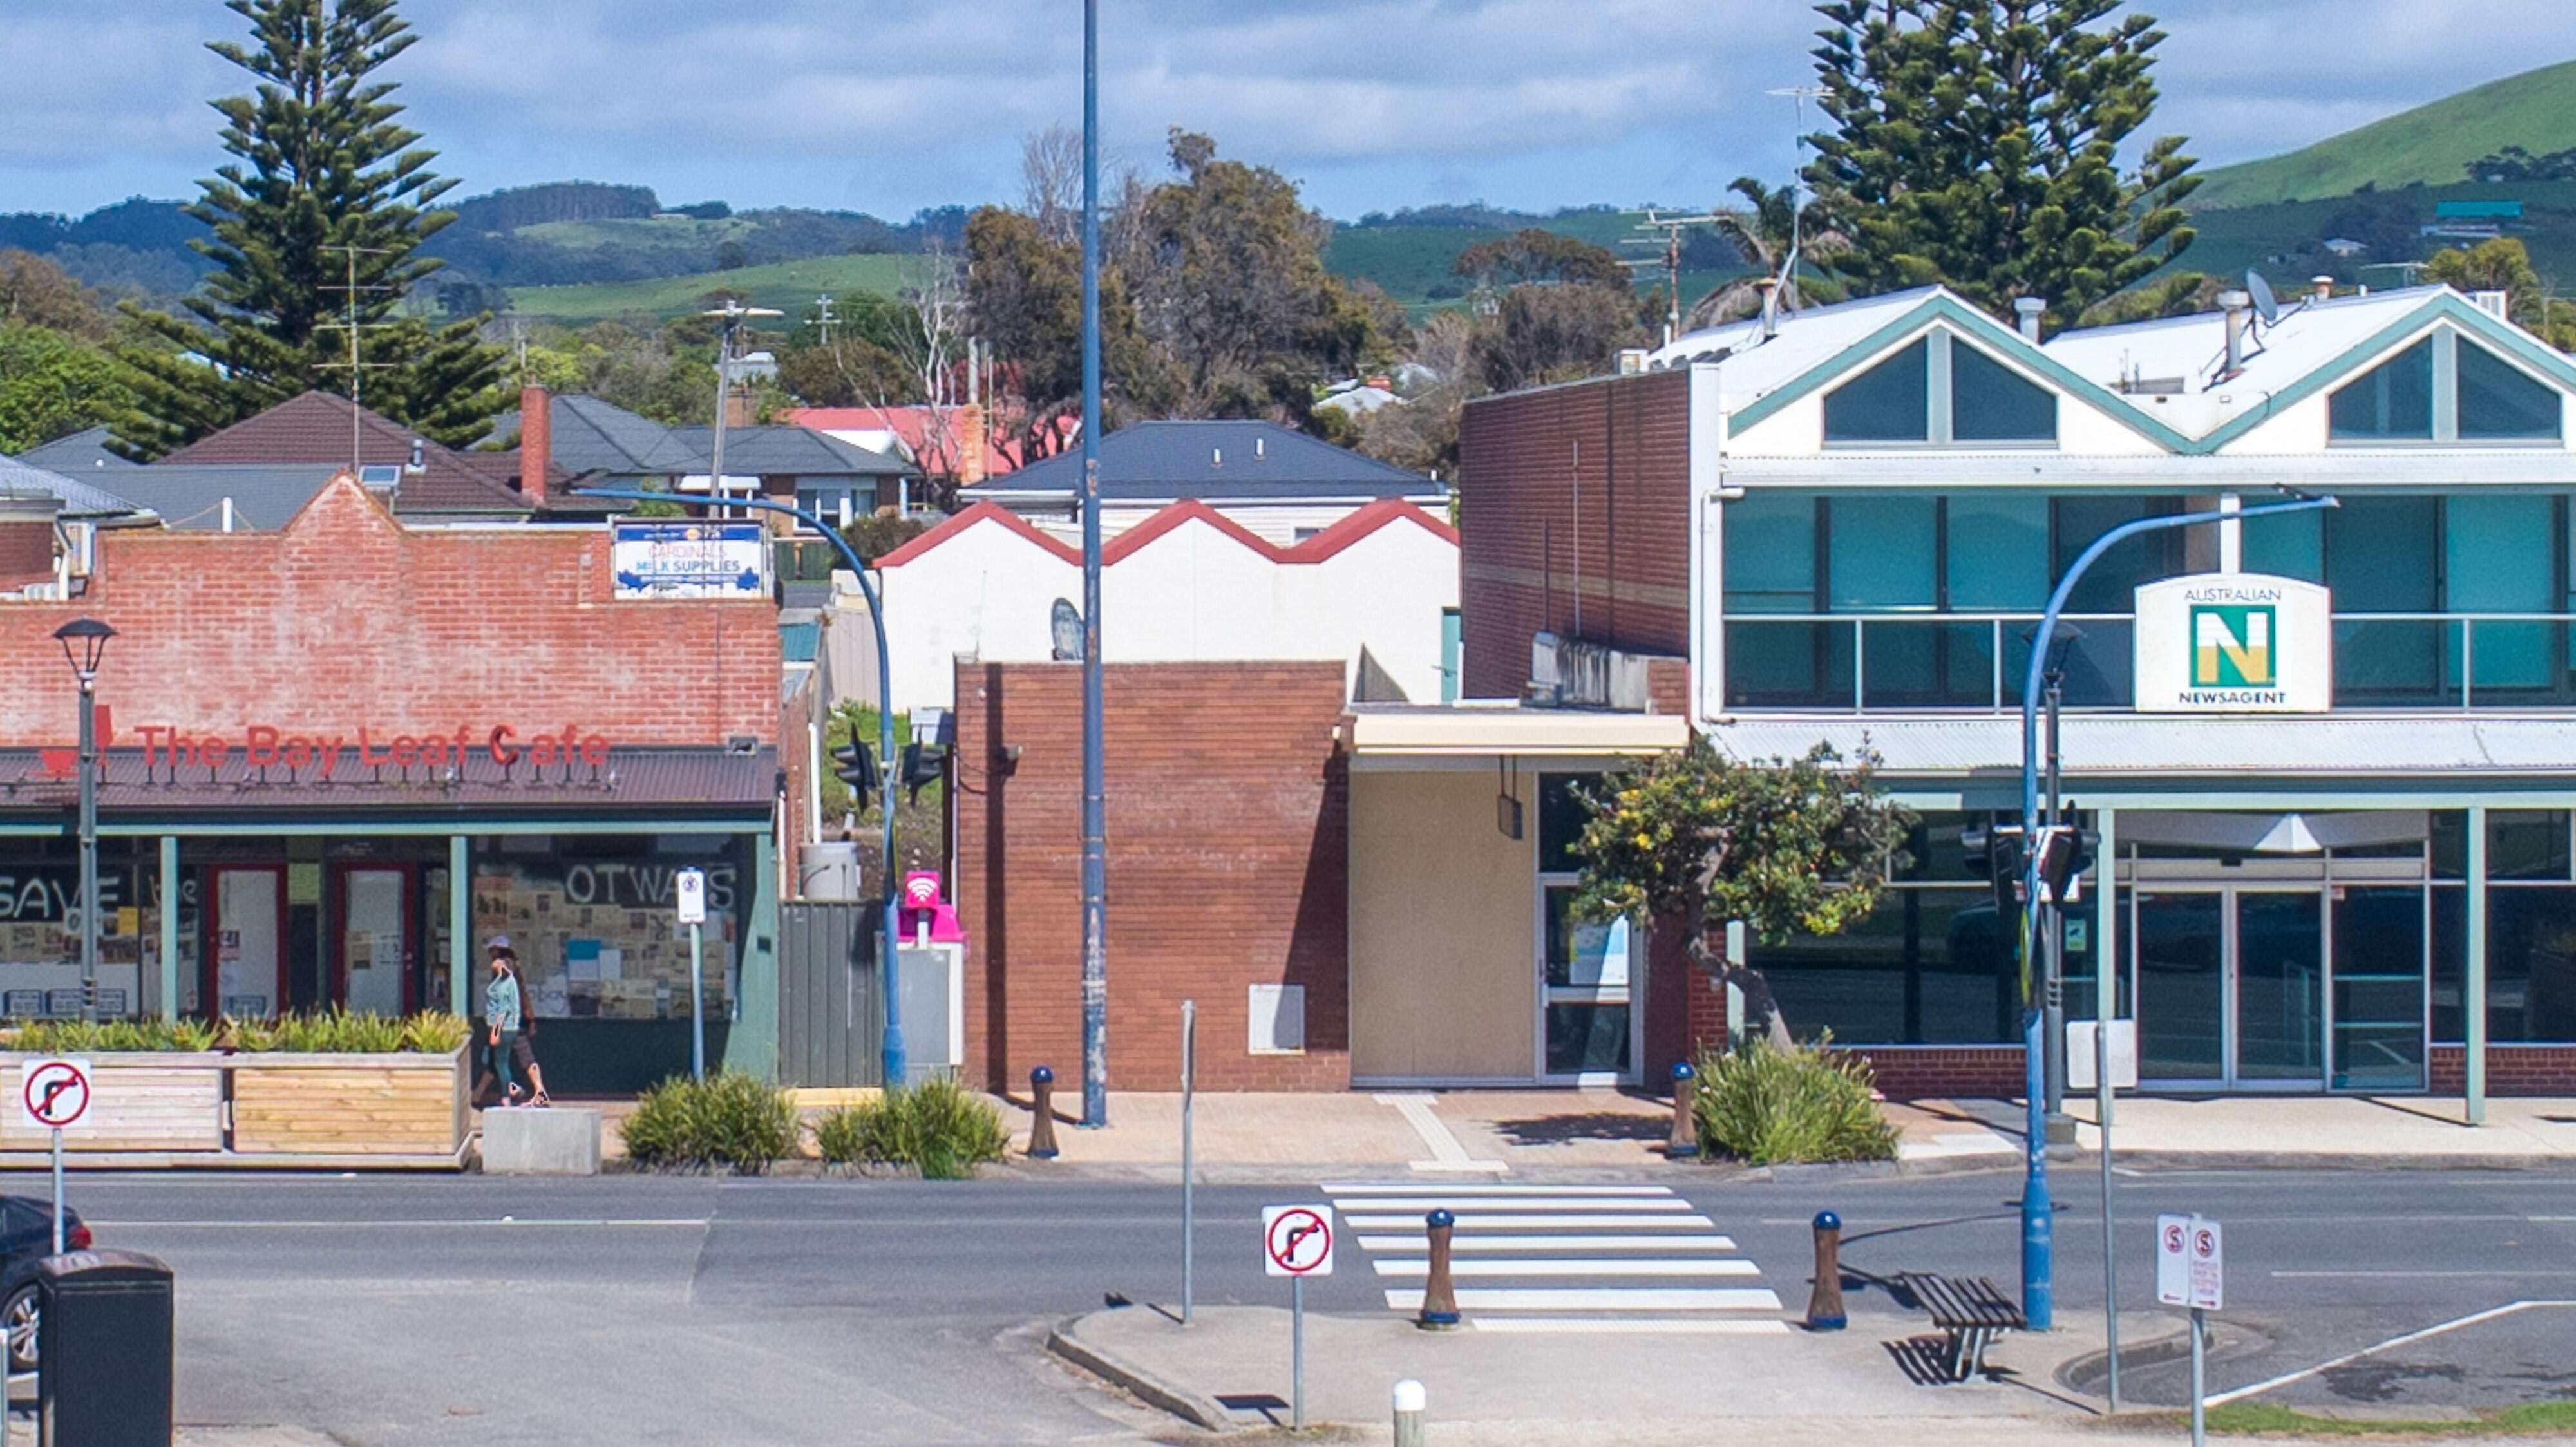 Apollo Bay retail freehold smashes reserve in stunning result